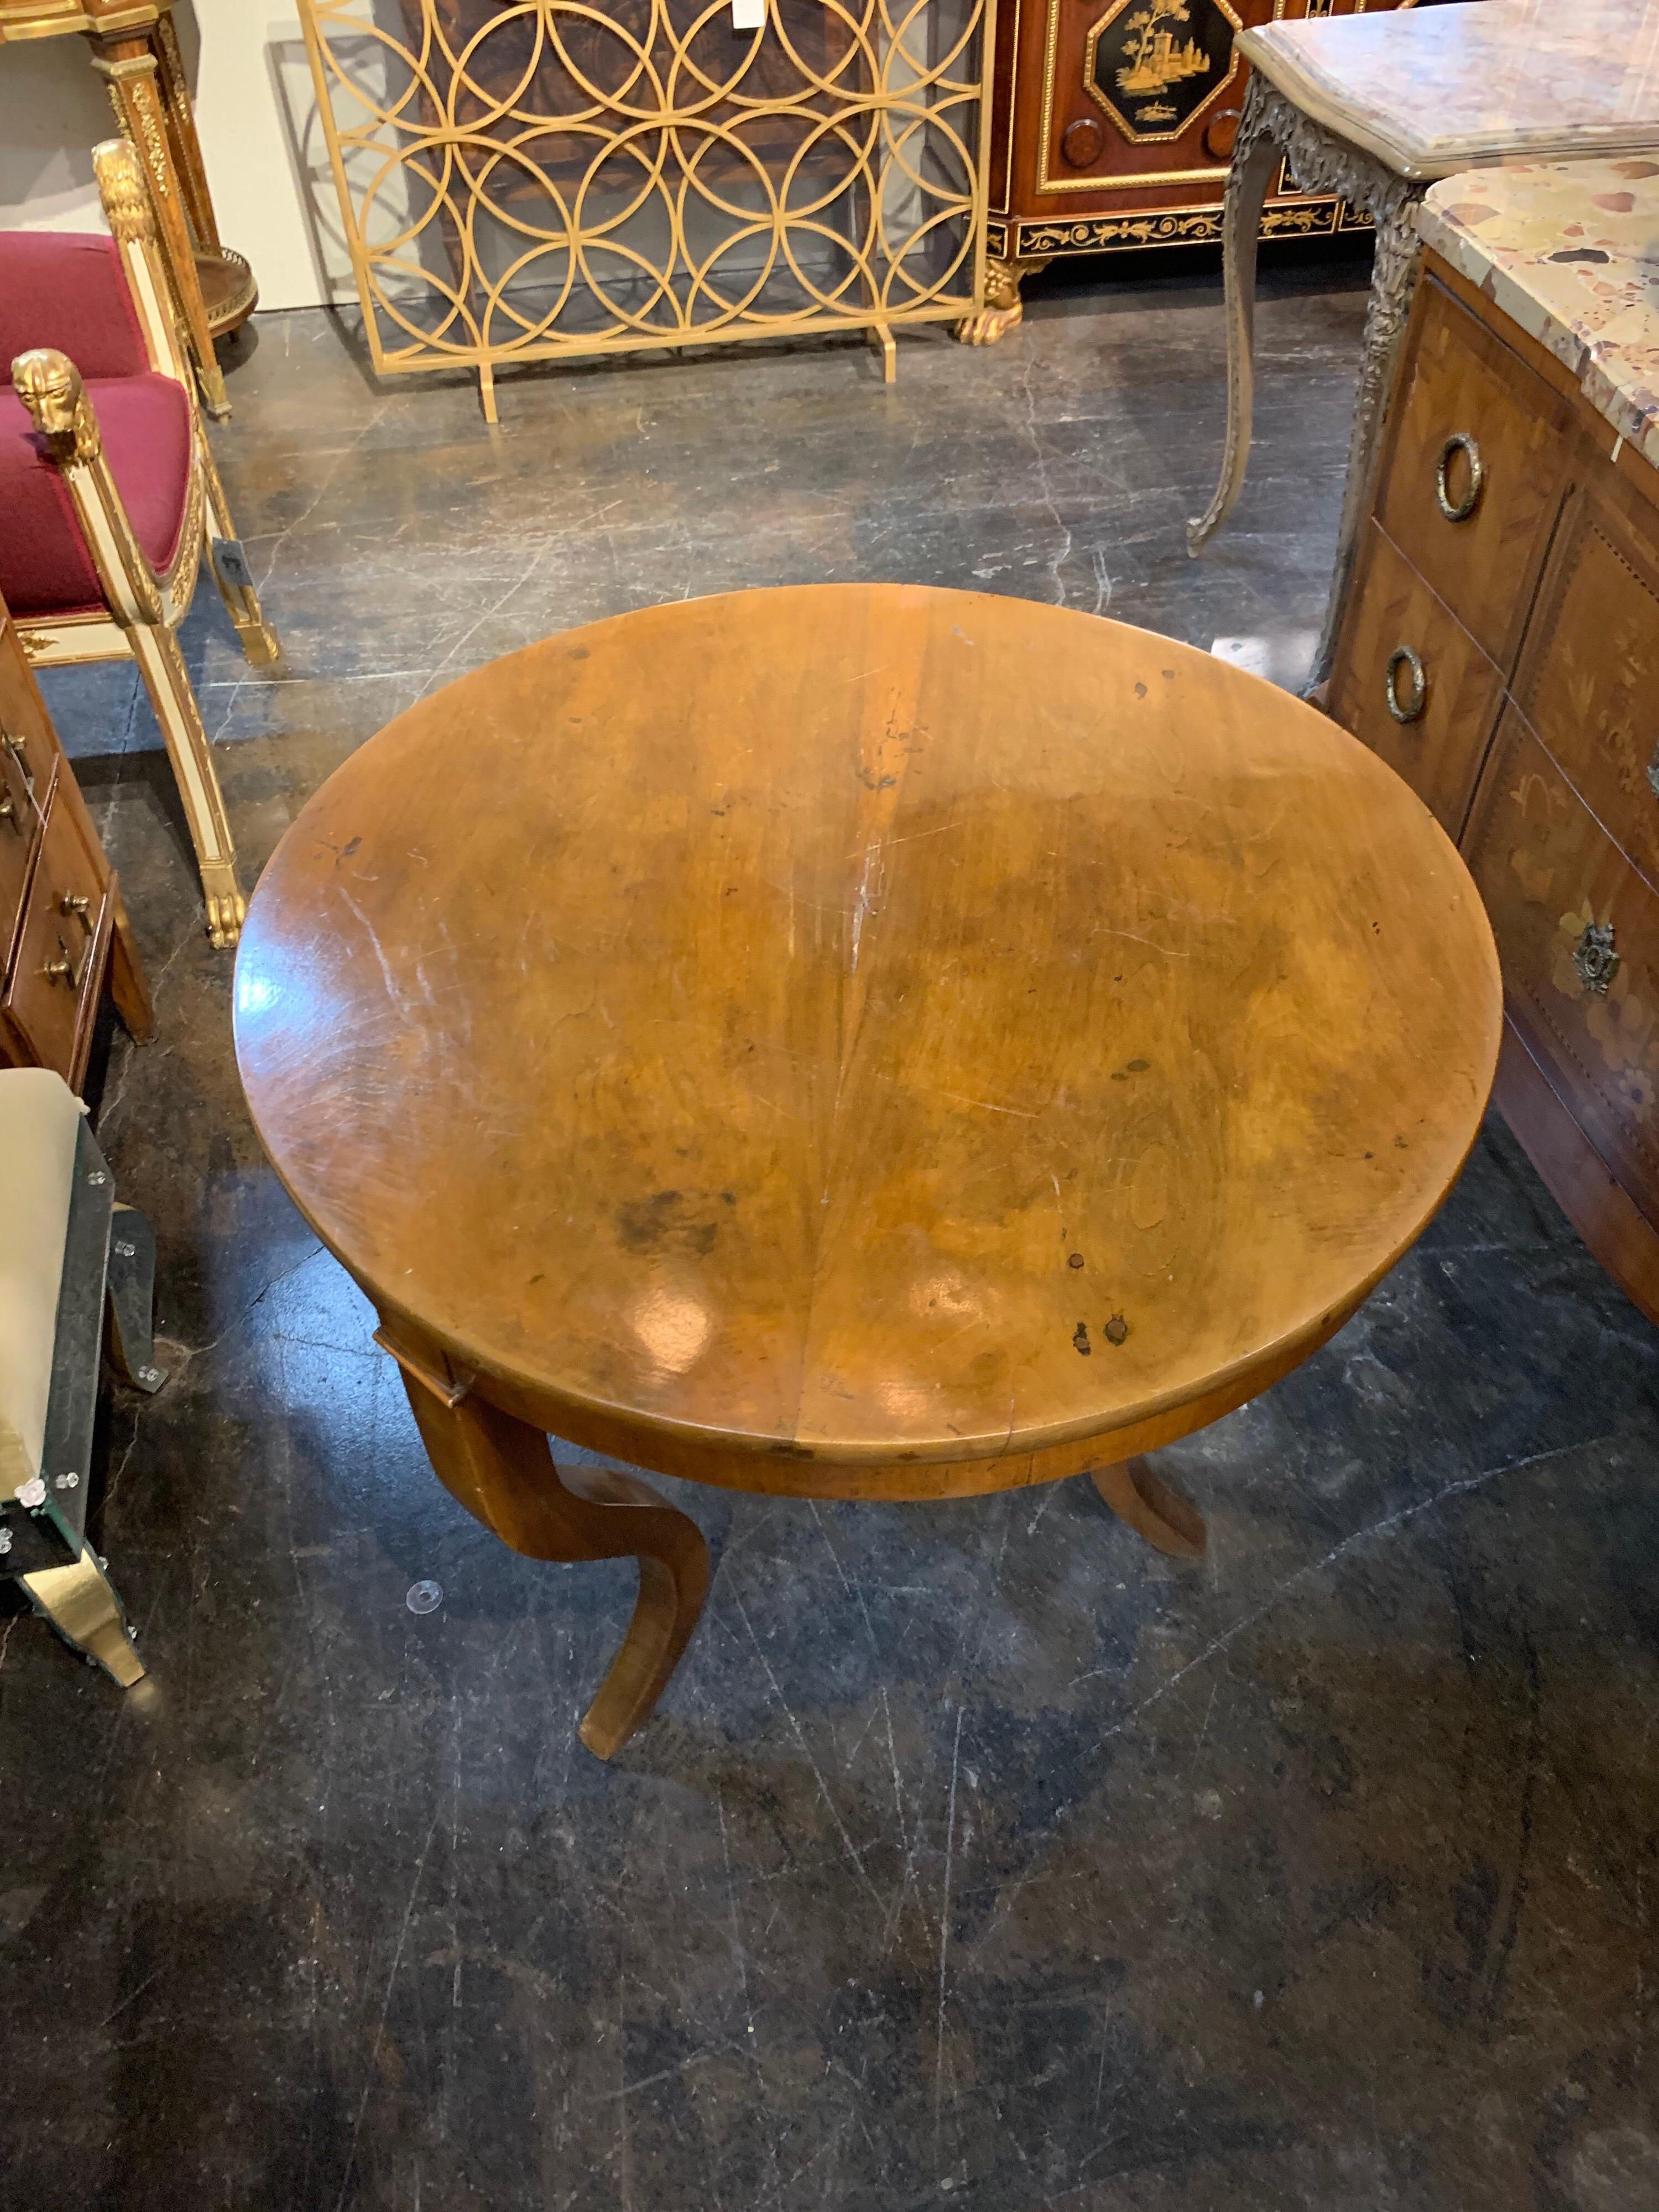 Handsome antique Biedermeier side table. Nice polished finish and a classic style!
 